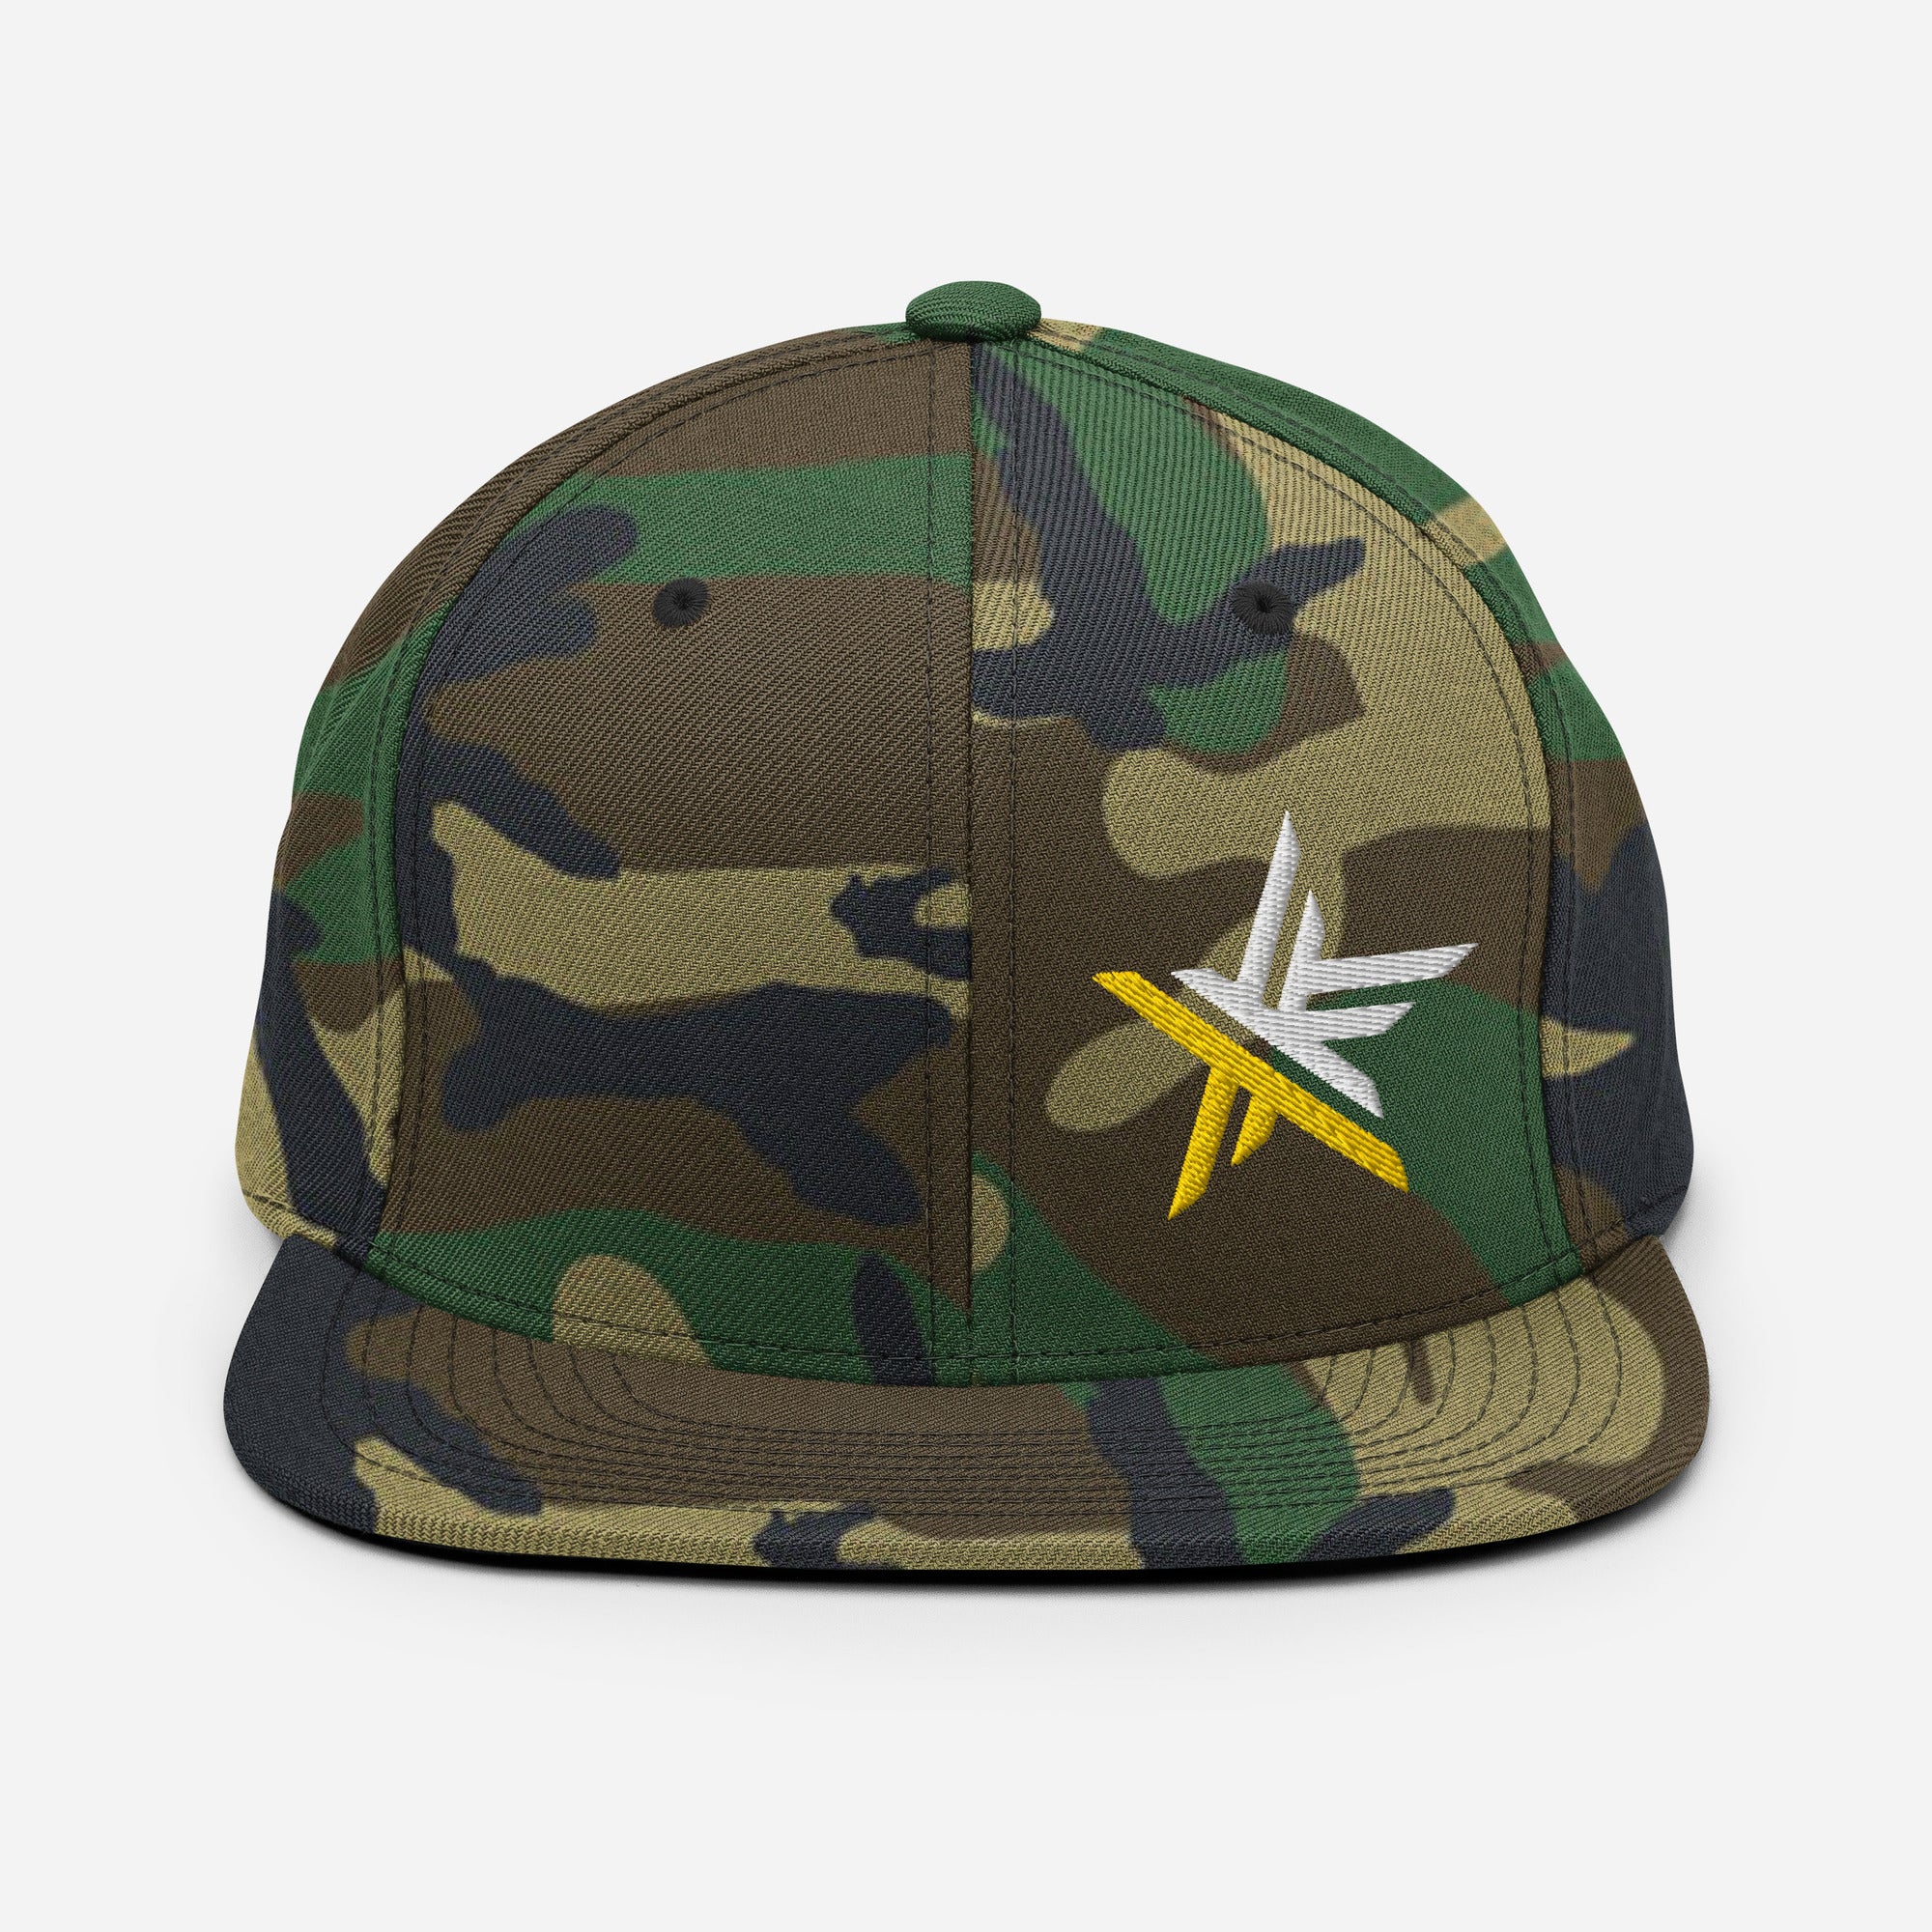 U.S. Army Esports | On Demand | 3D Puff Embroidered Snapback Hat [White Offset Logo]